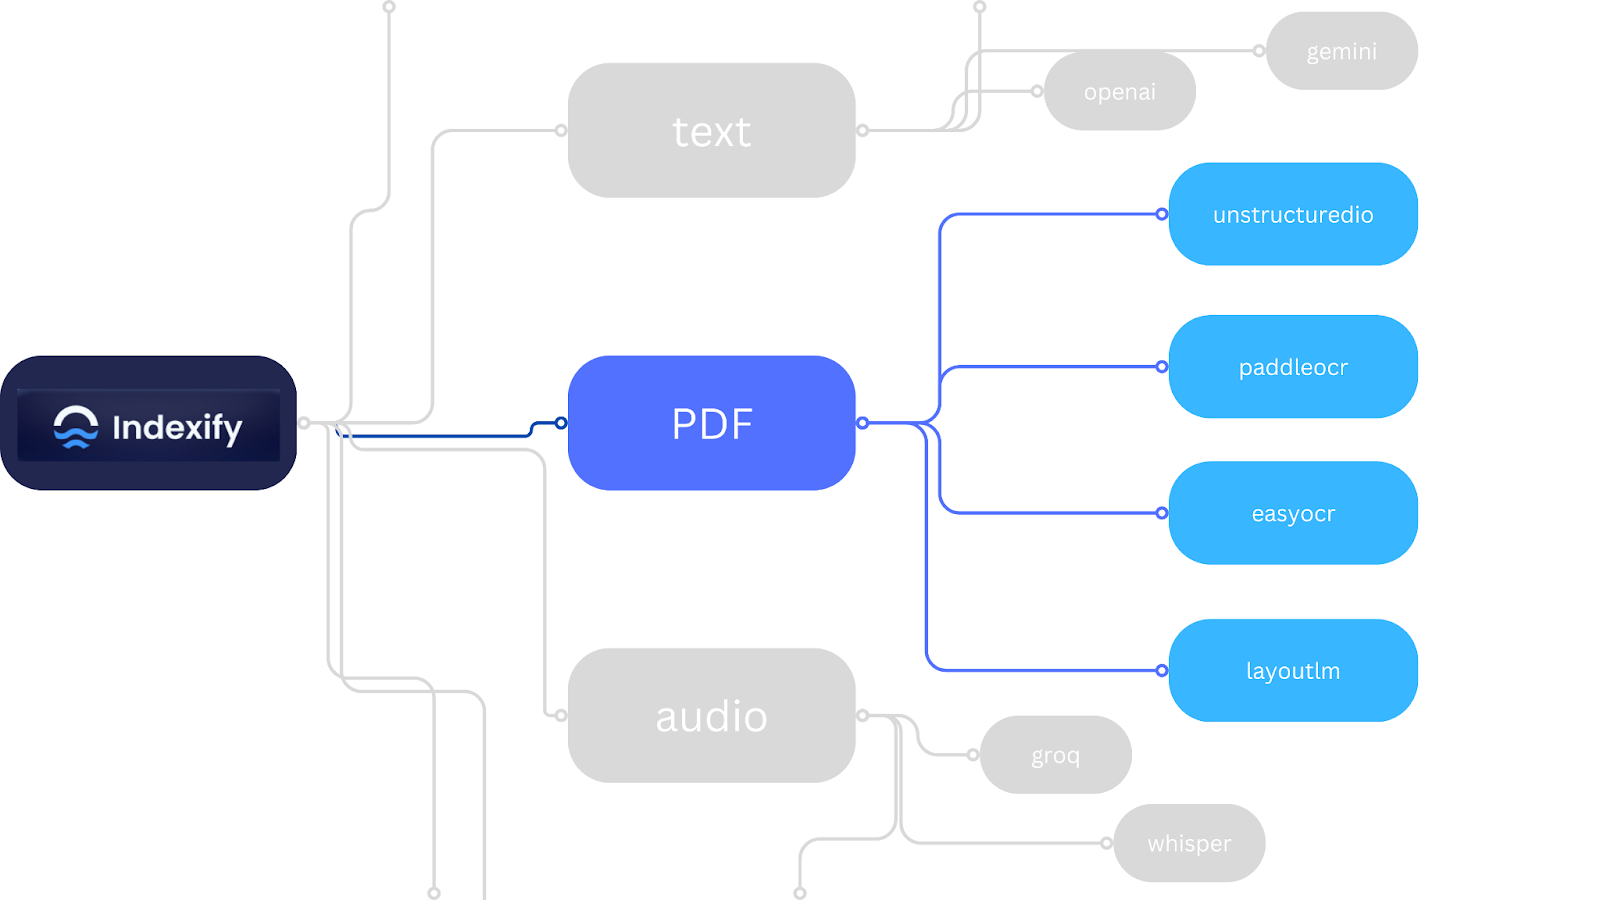 Extract text from PDF files seamlessly with Indexify and PaddleOCR